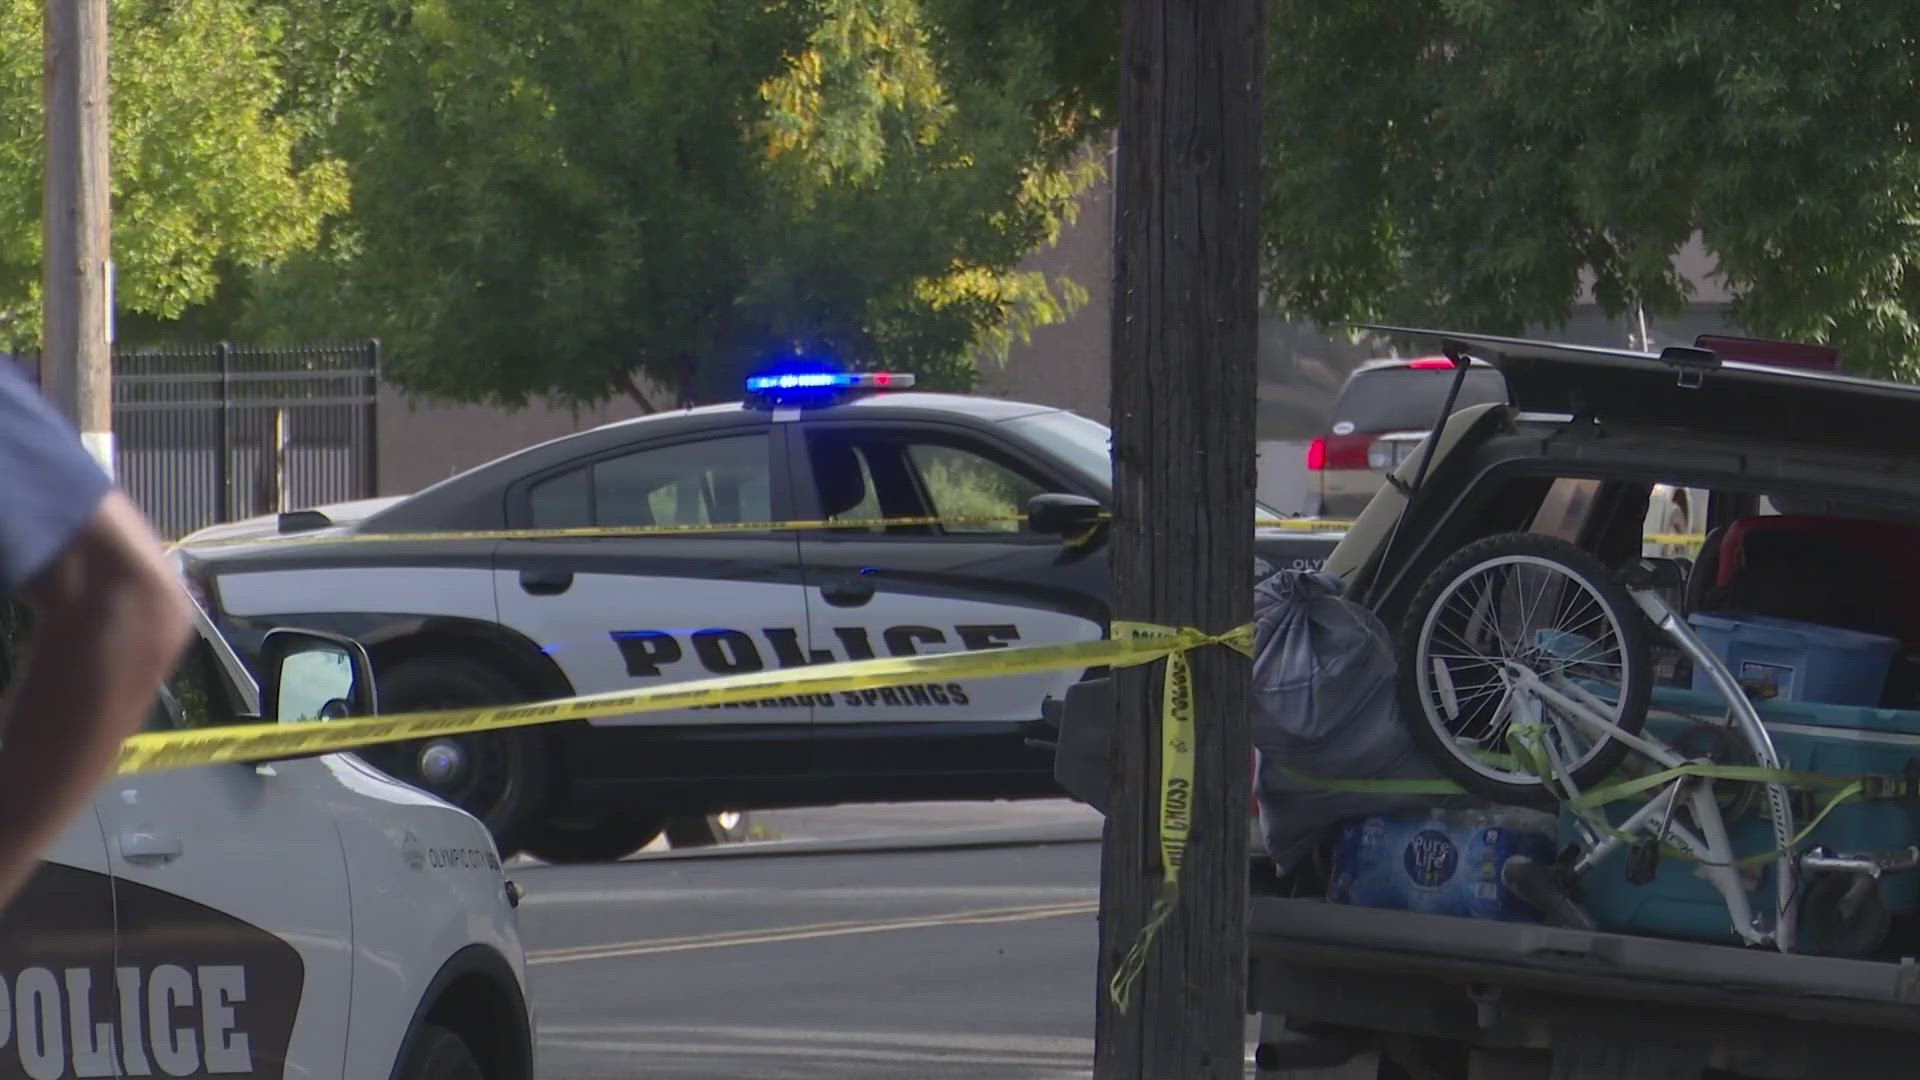 The line-of-duty death of the parole officer occurred around 4 p.m. in downtown Colorado Springs after a parolee got access to a car.